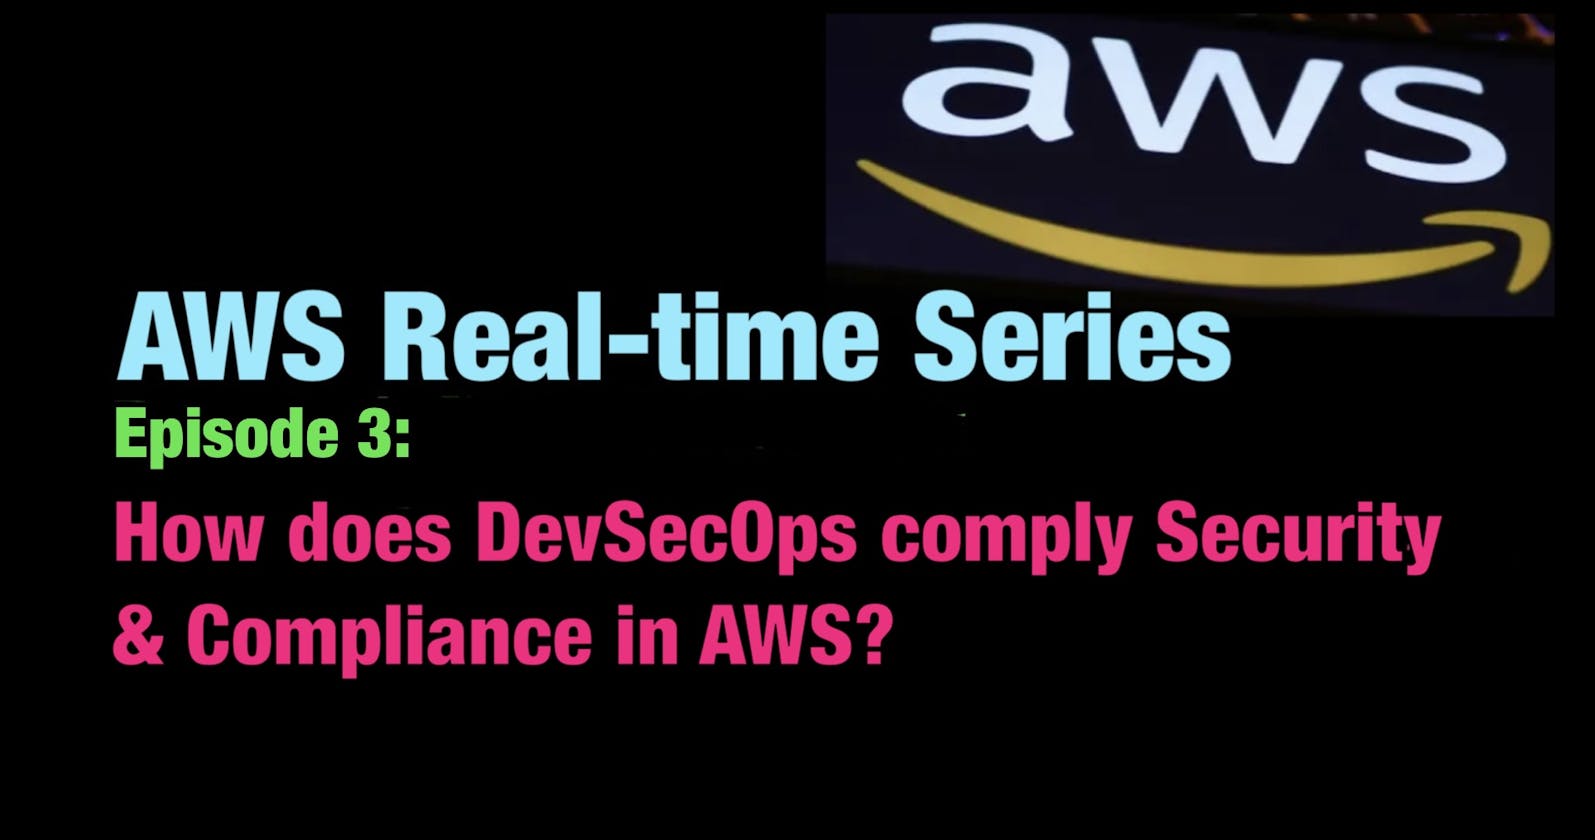 How does DevSecOps comply with Security & Compliance in AWS?